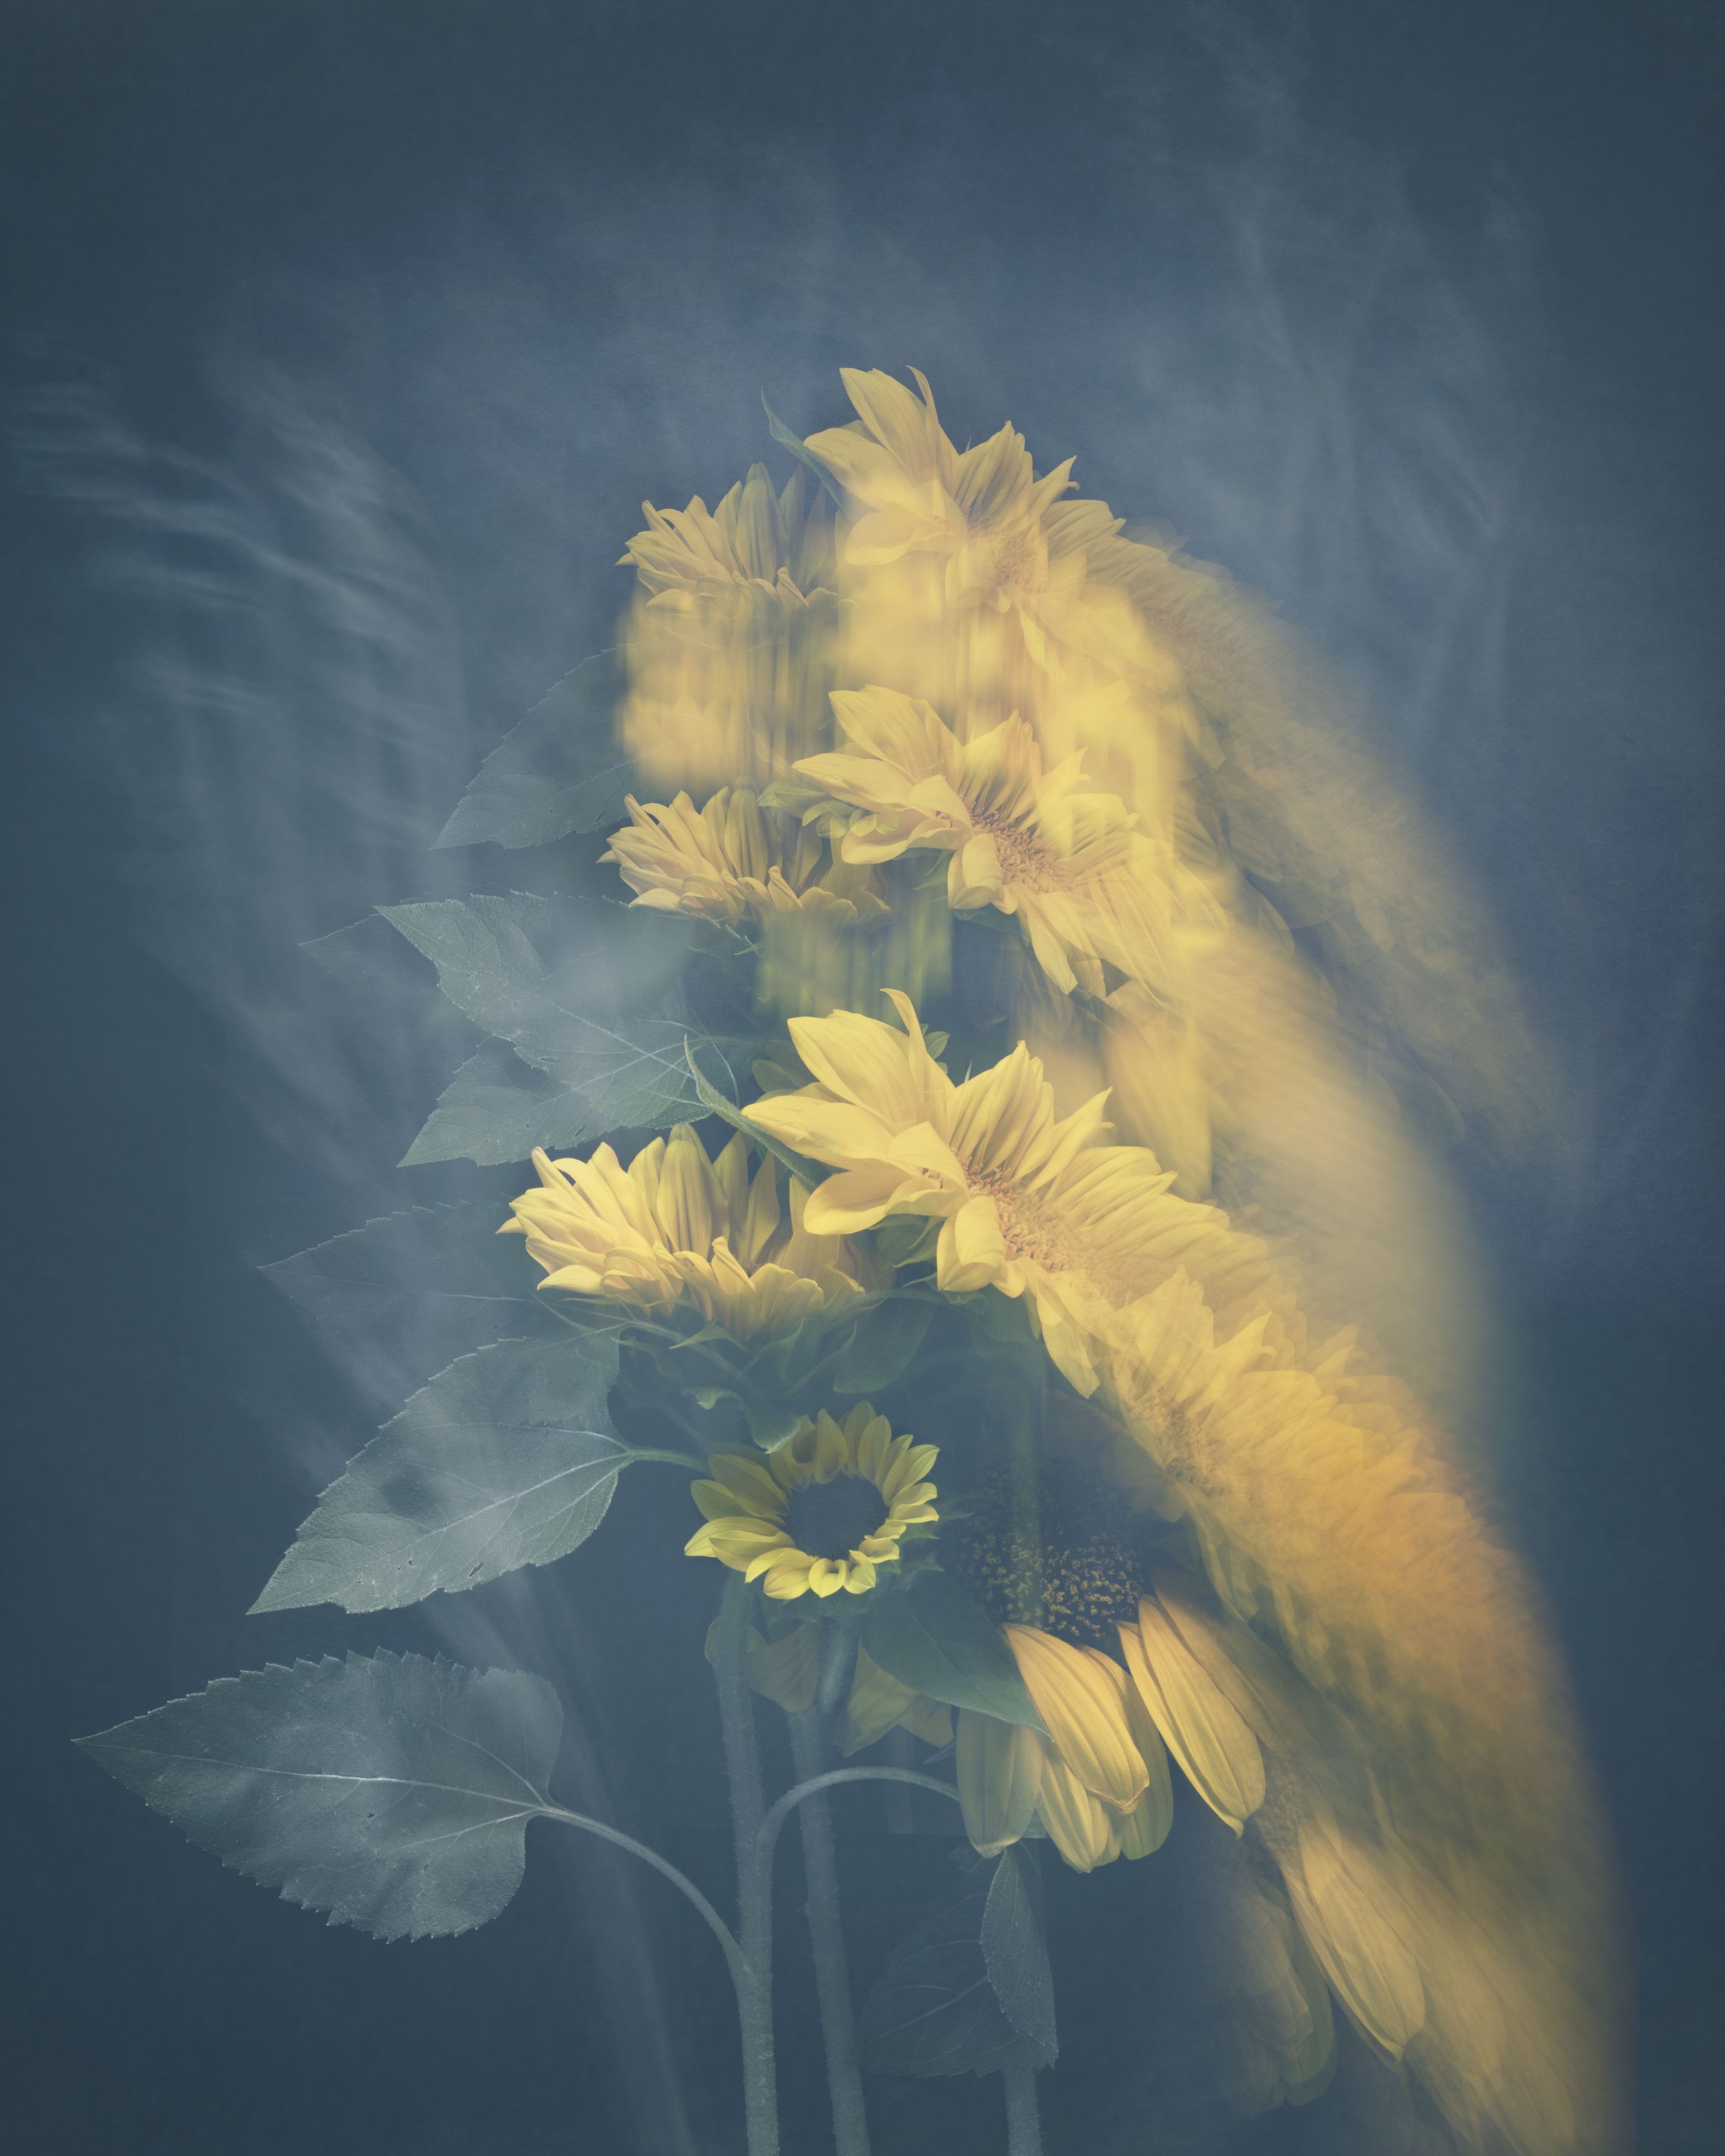 Joyce Tenneson, Sunflowers Dancing, 2/10, 2021, Archival pigment prints, 22 x 17 inches, $1, 900.